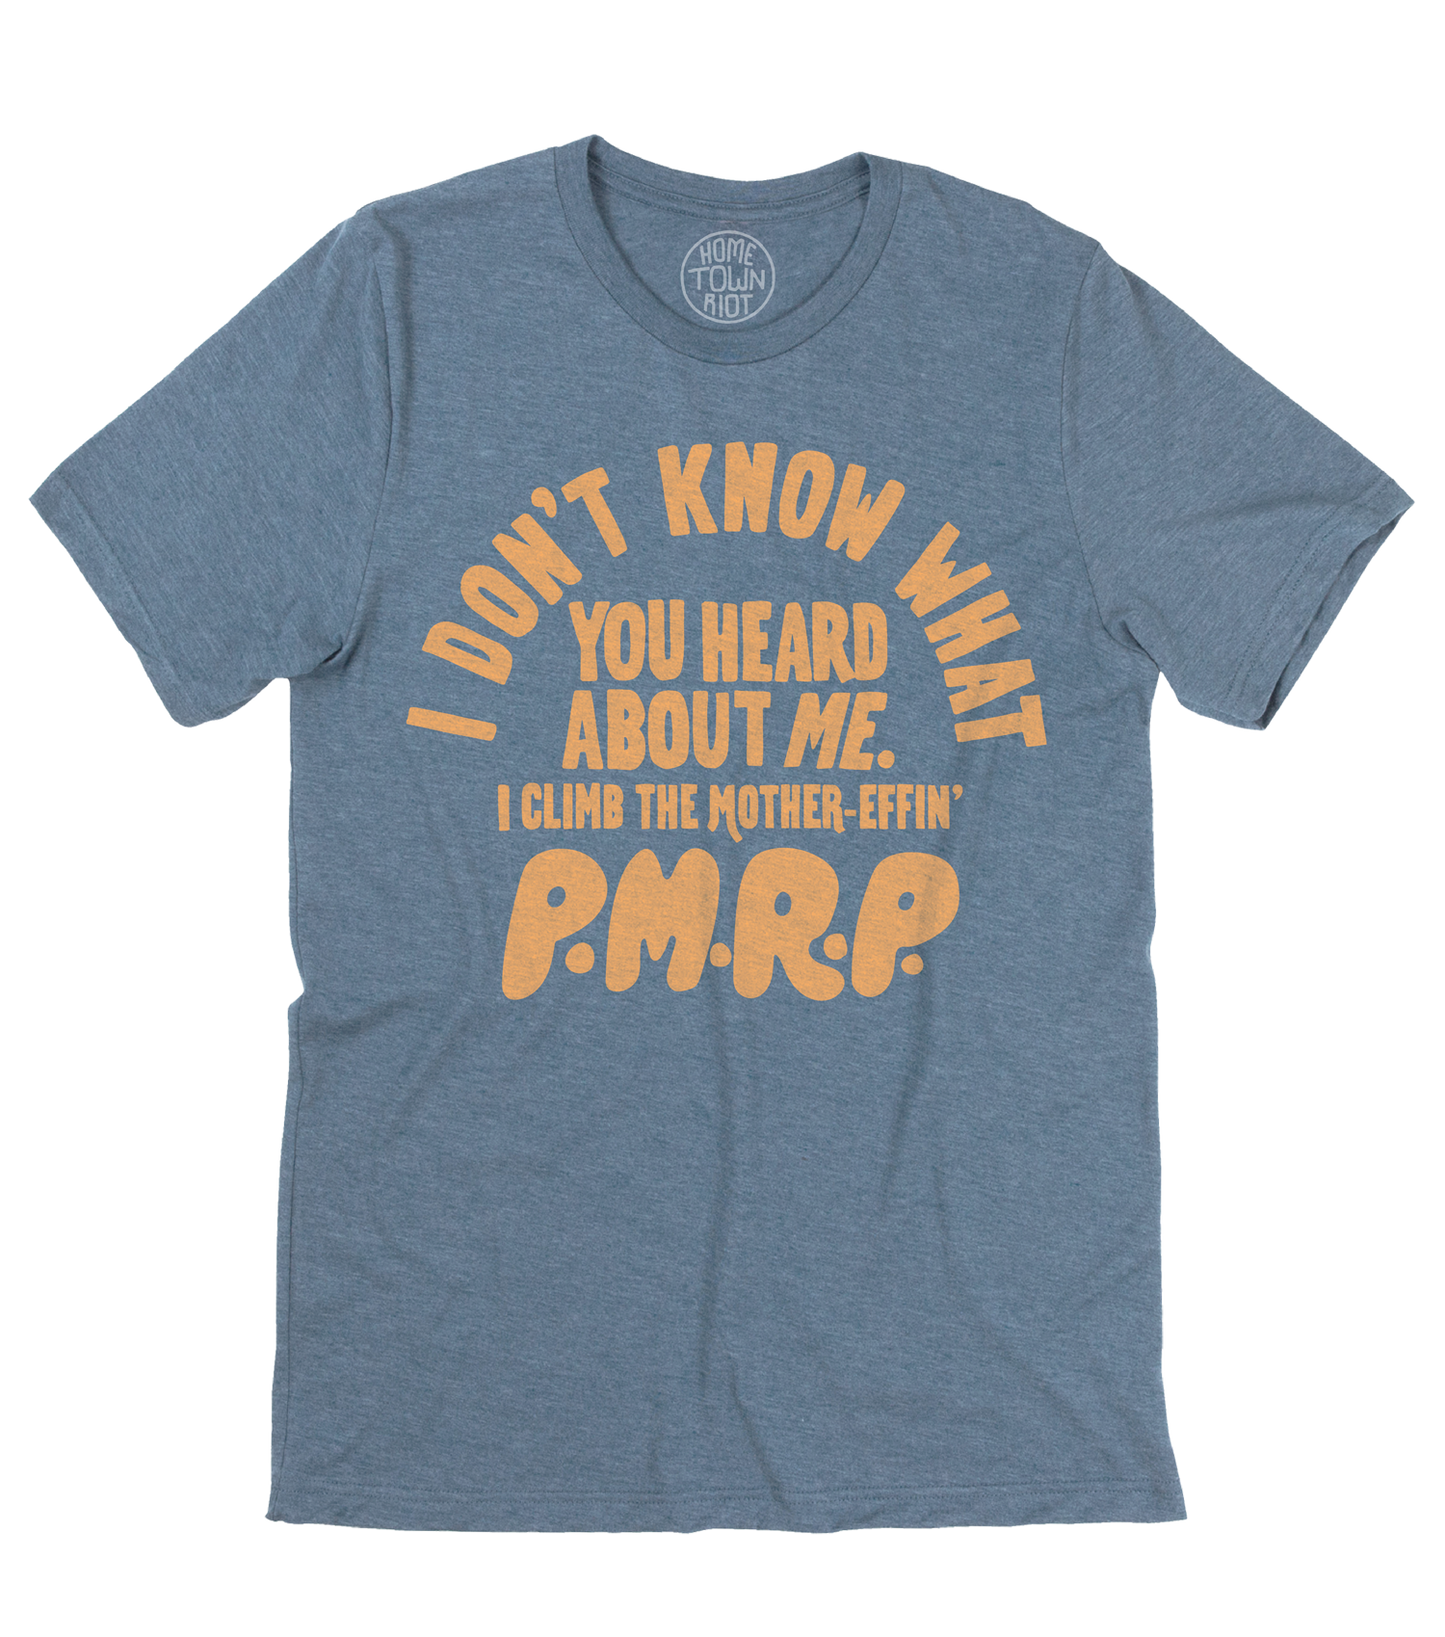 The Mother-effin' PMRP Shirt